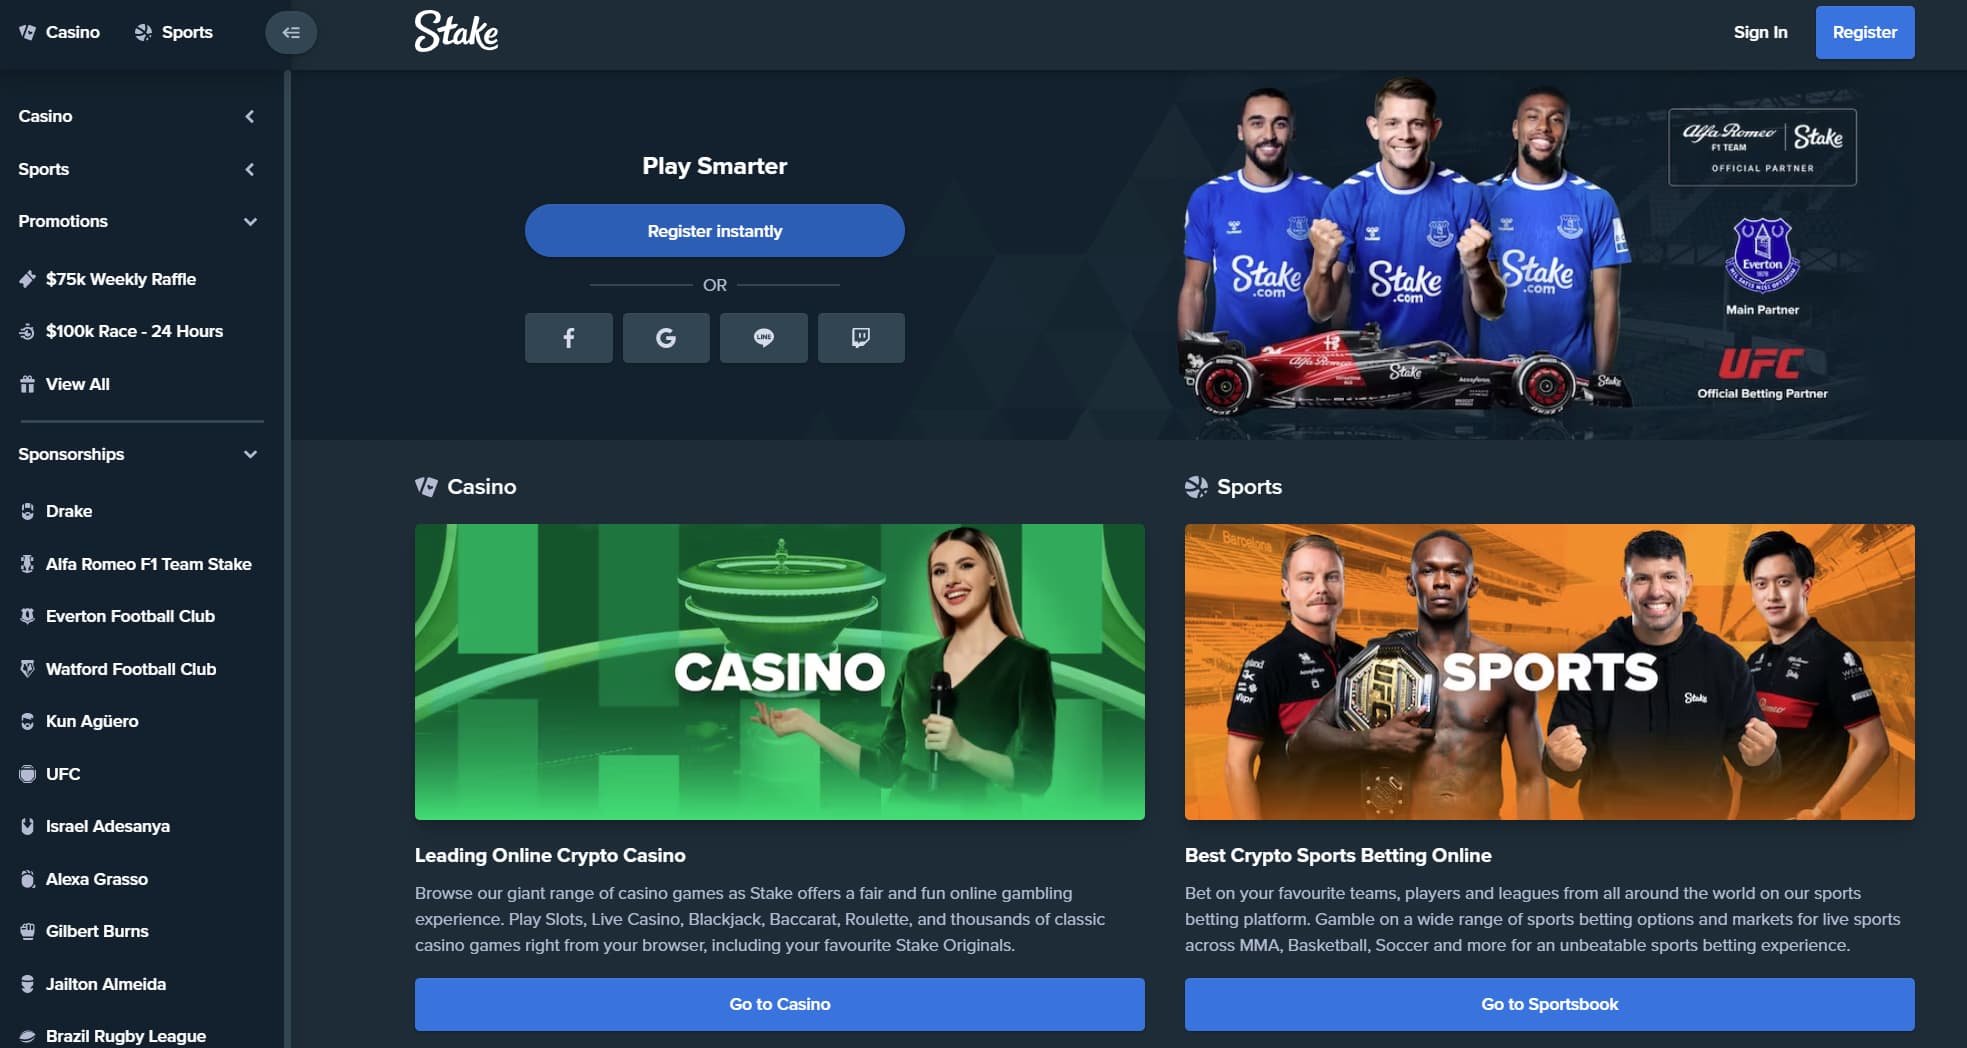 Stake casino and sportsbook